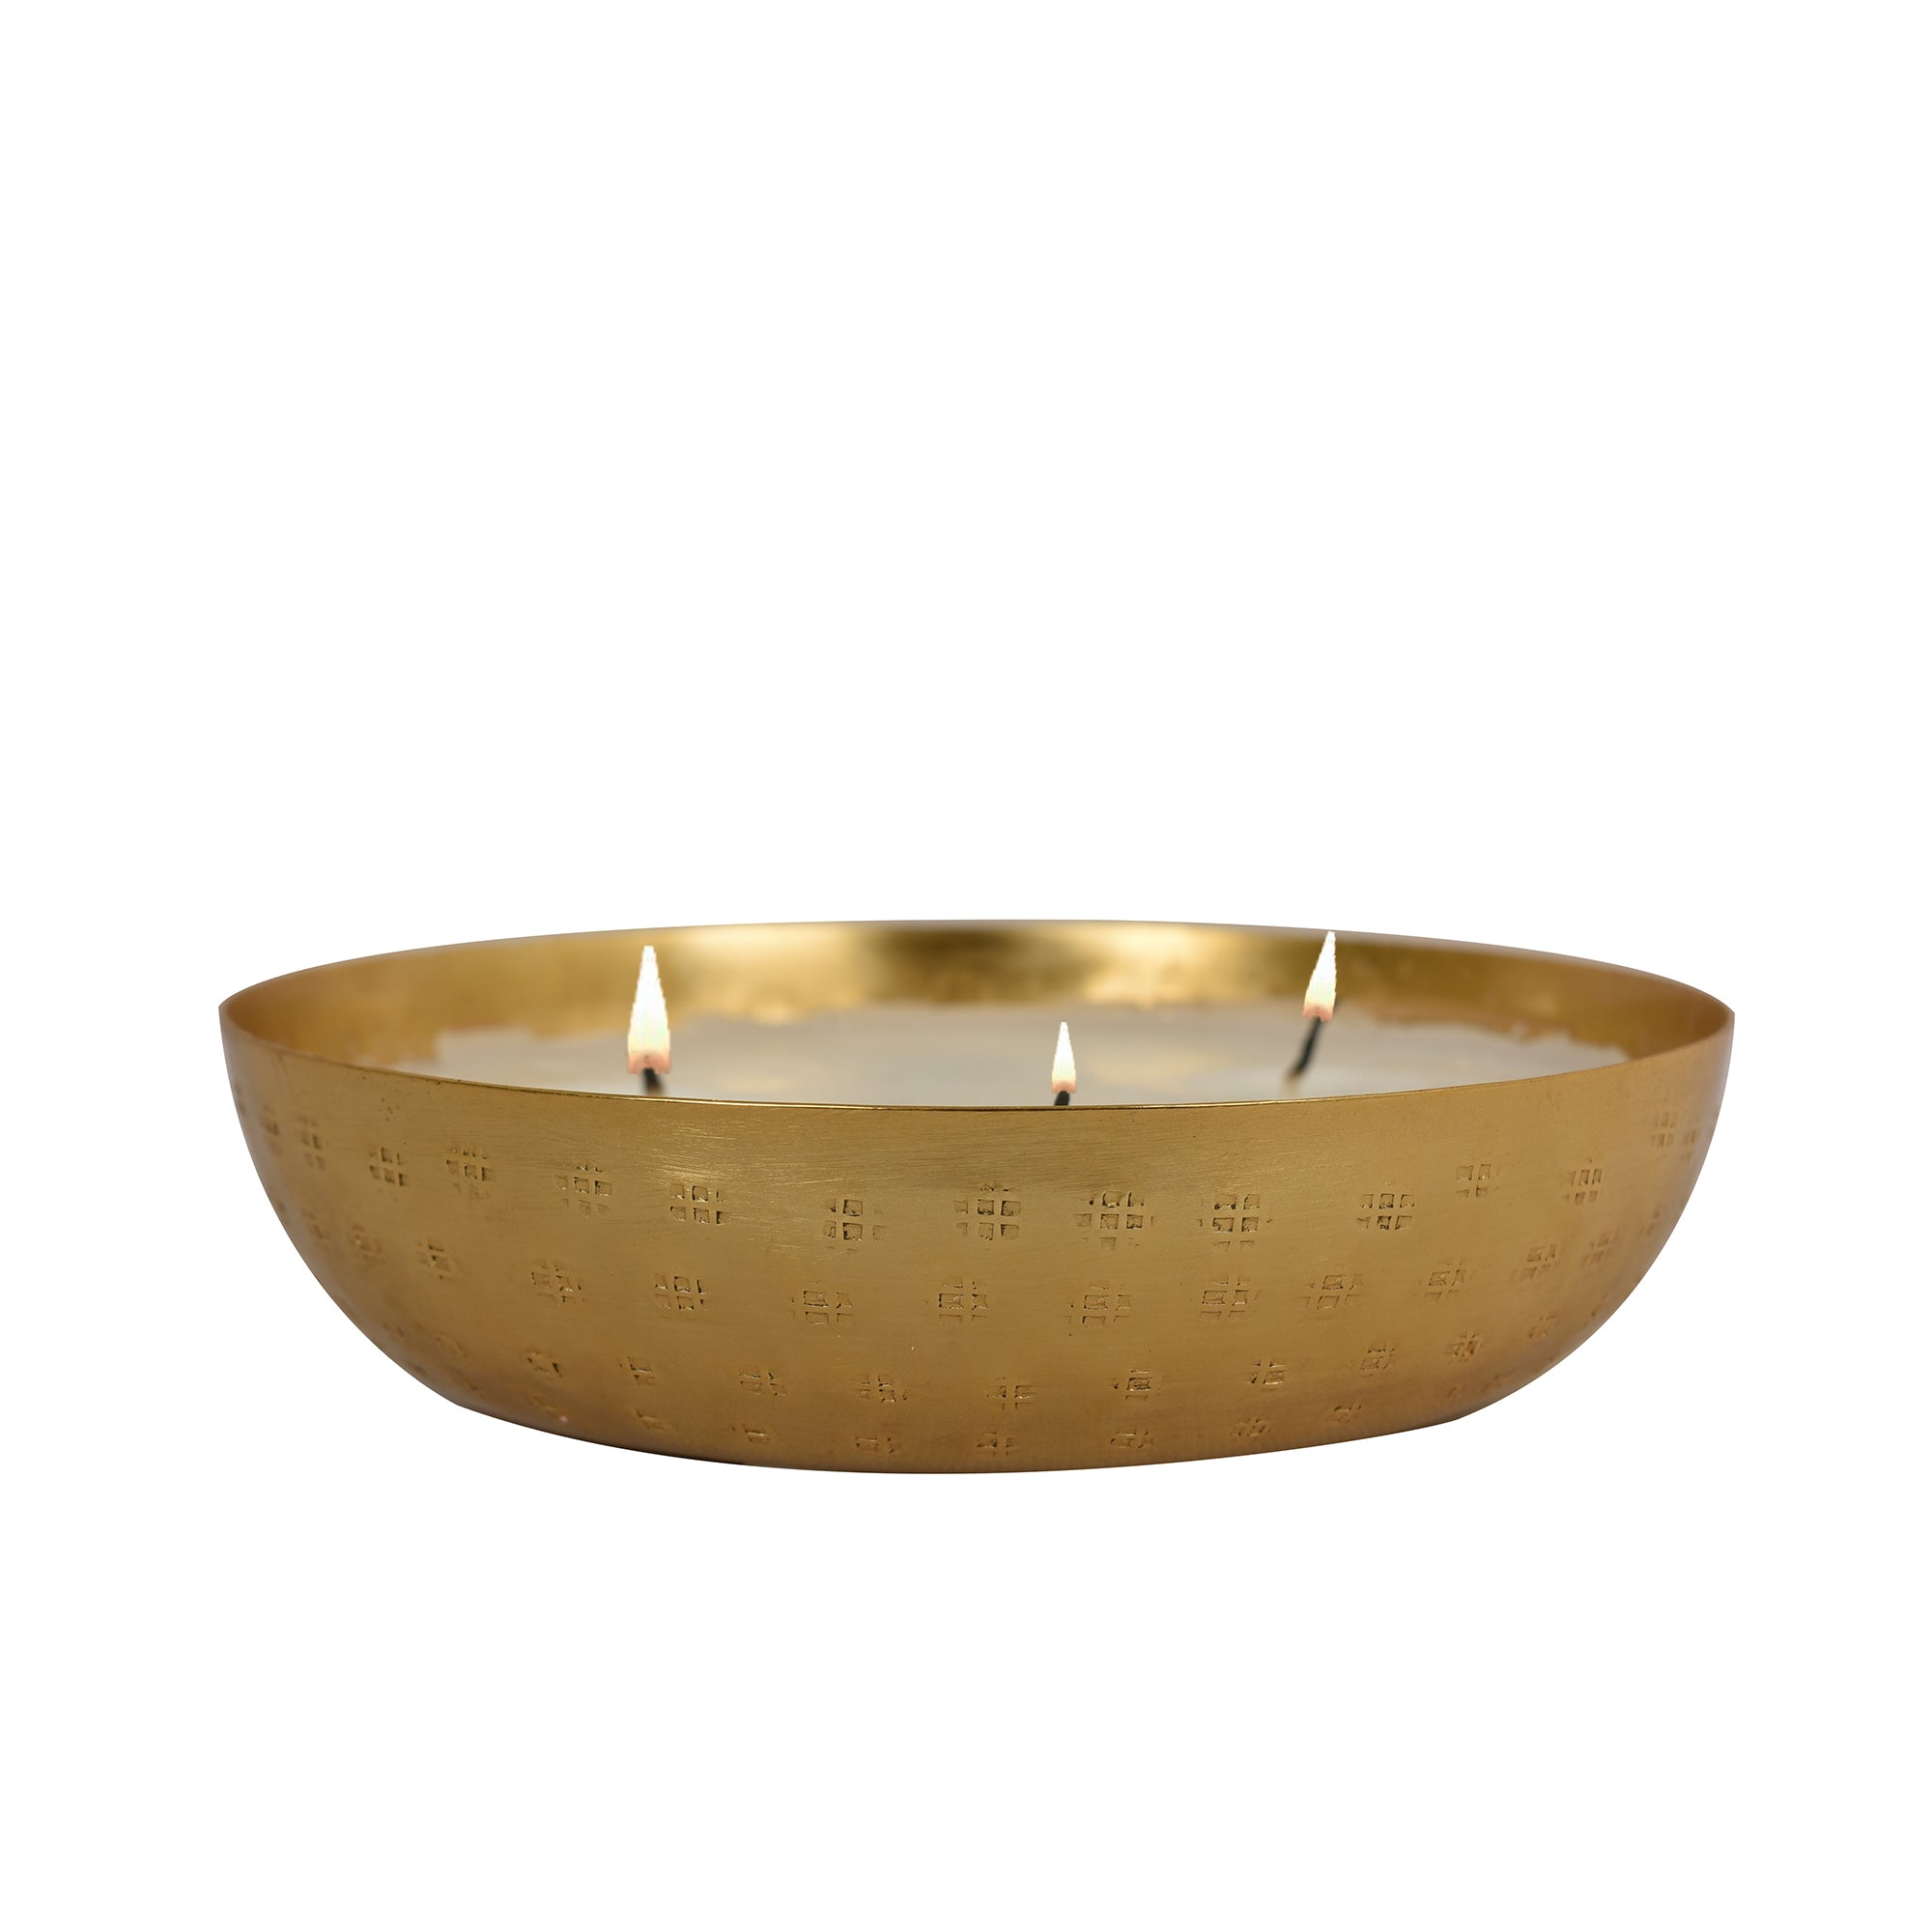 Roshni Scented Flovored Wax Filled Metal Bowl Urli 6 inches